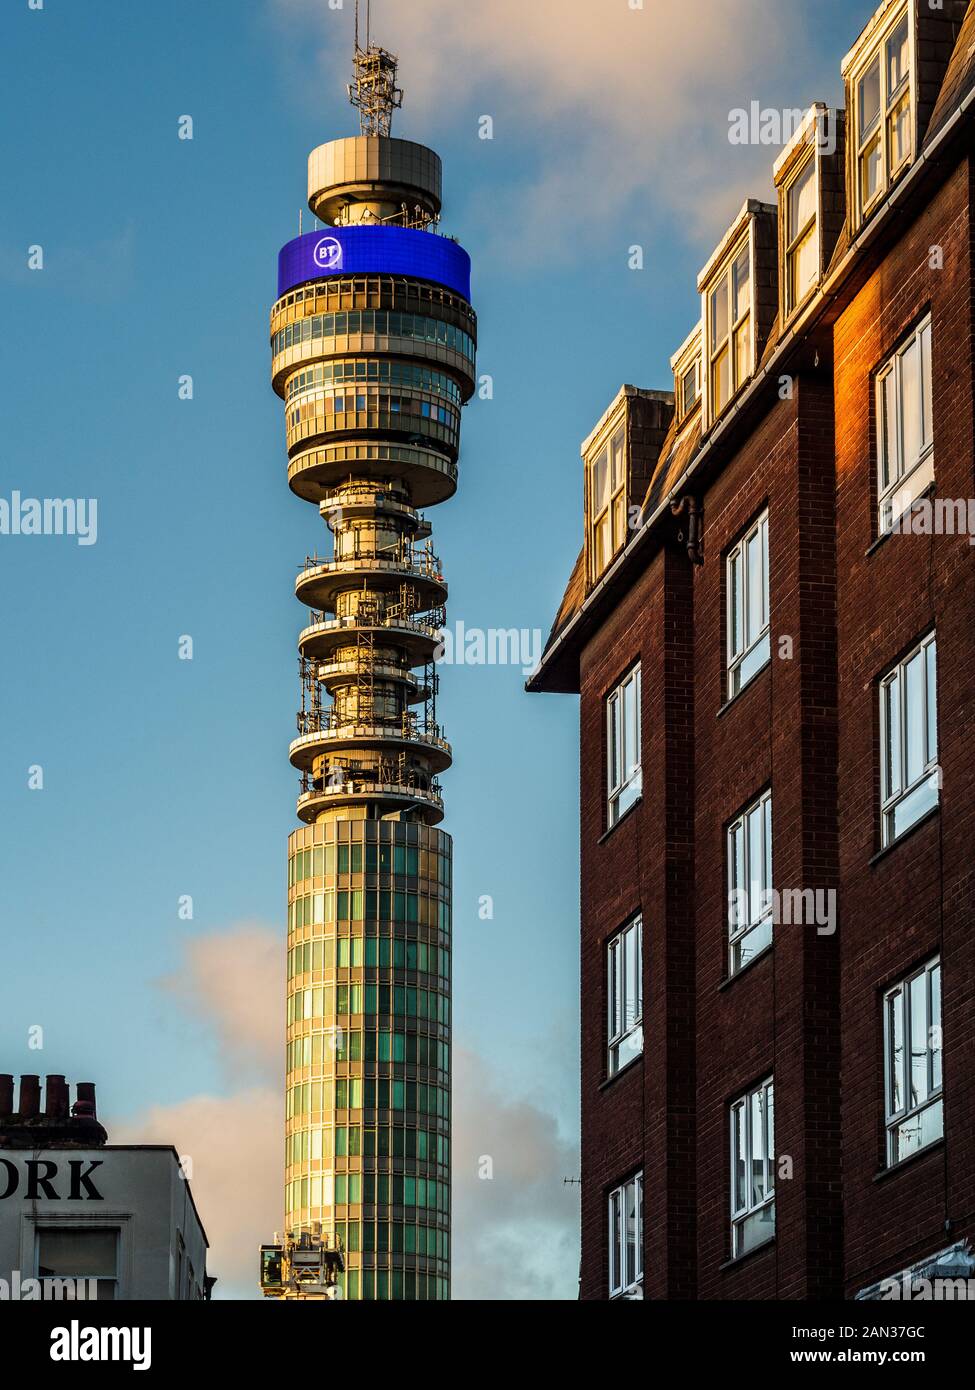 BT Tower London with new 2019 BT Logo. The BT Tower opened in 1965. Stock Photo